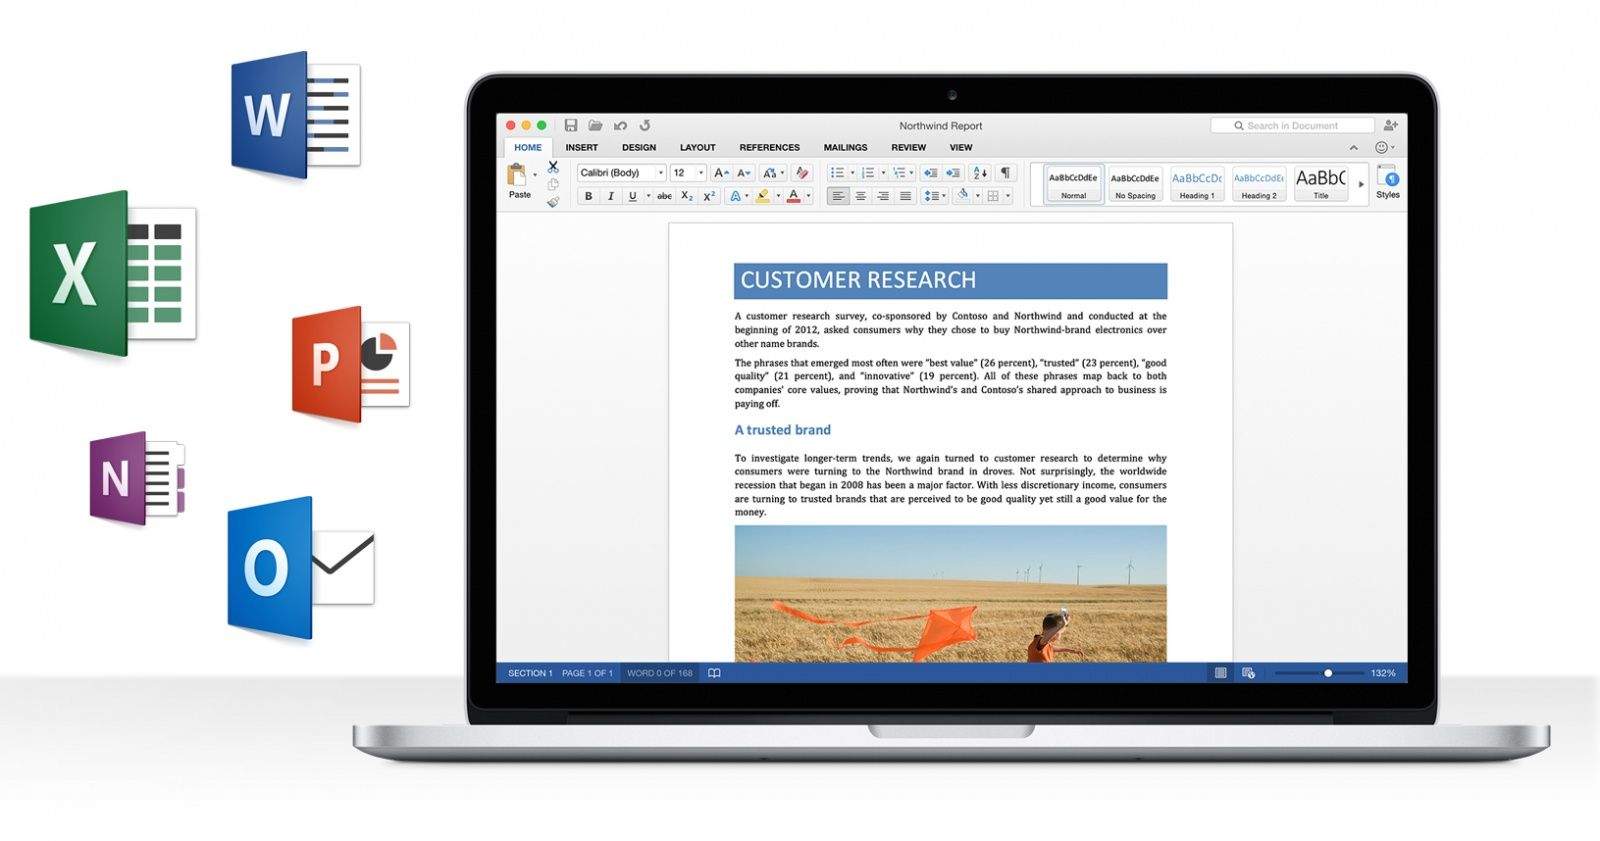 Microsoft gives office for mac